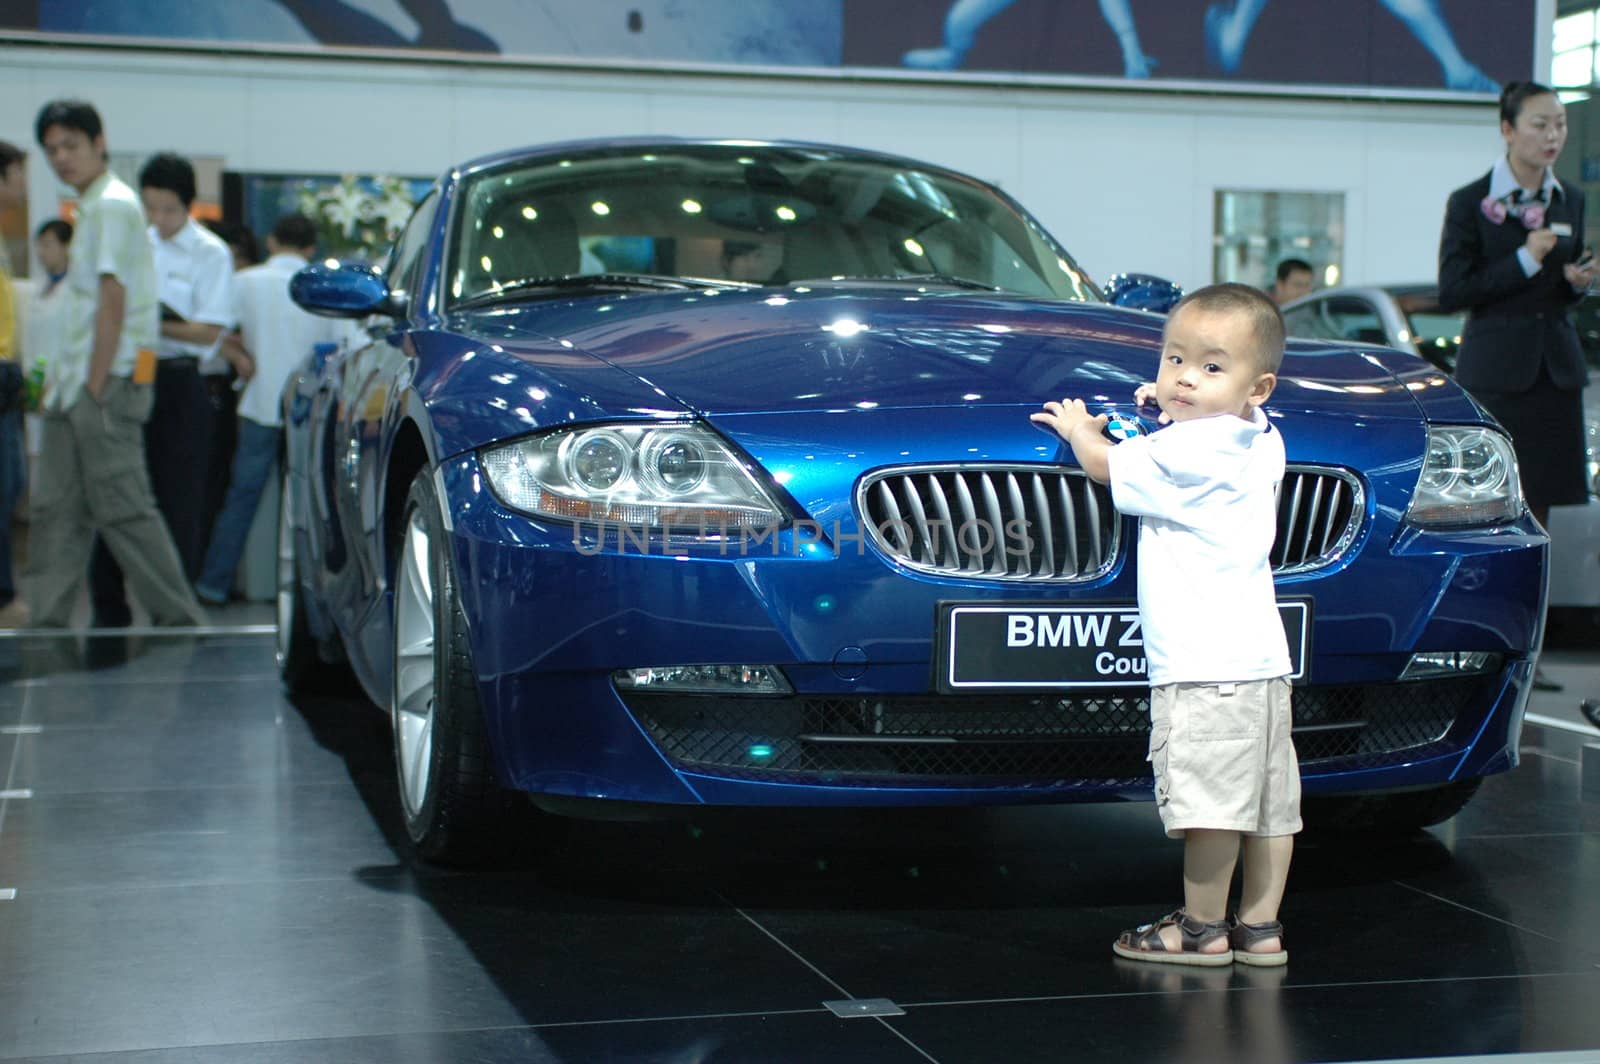 China, Shenzhen Moto - car show in exhibition center. Visitors watching European, American and Chinese cars. Crowd of people interested in newest moto technology. Kid playing with new BMW car.